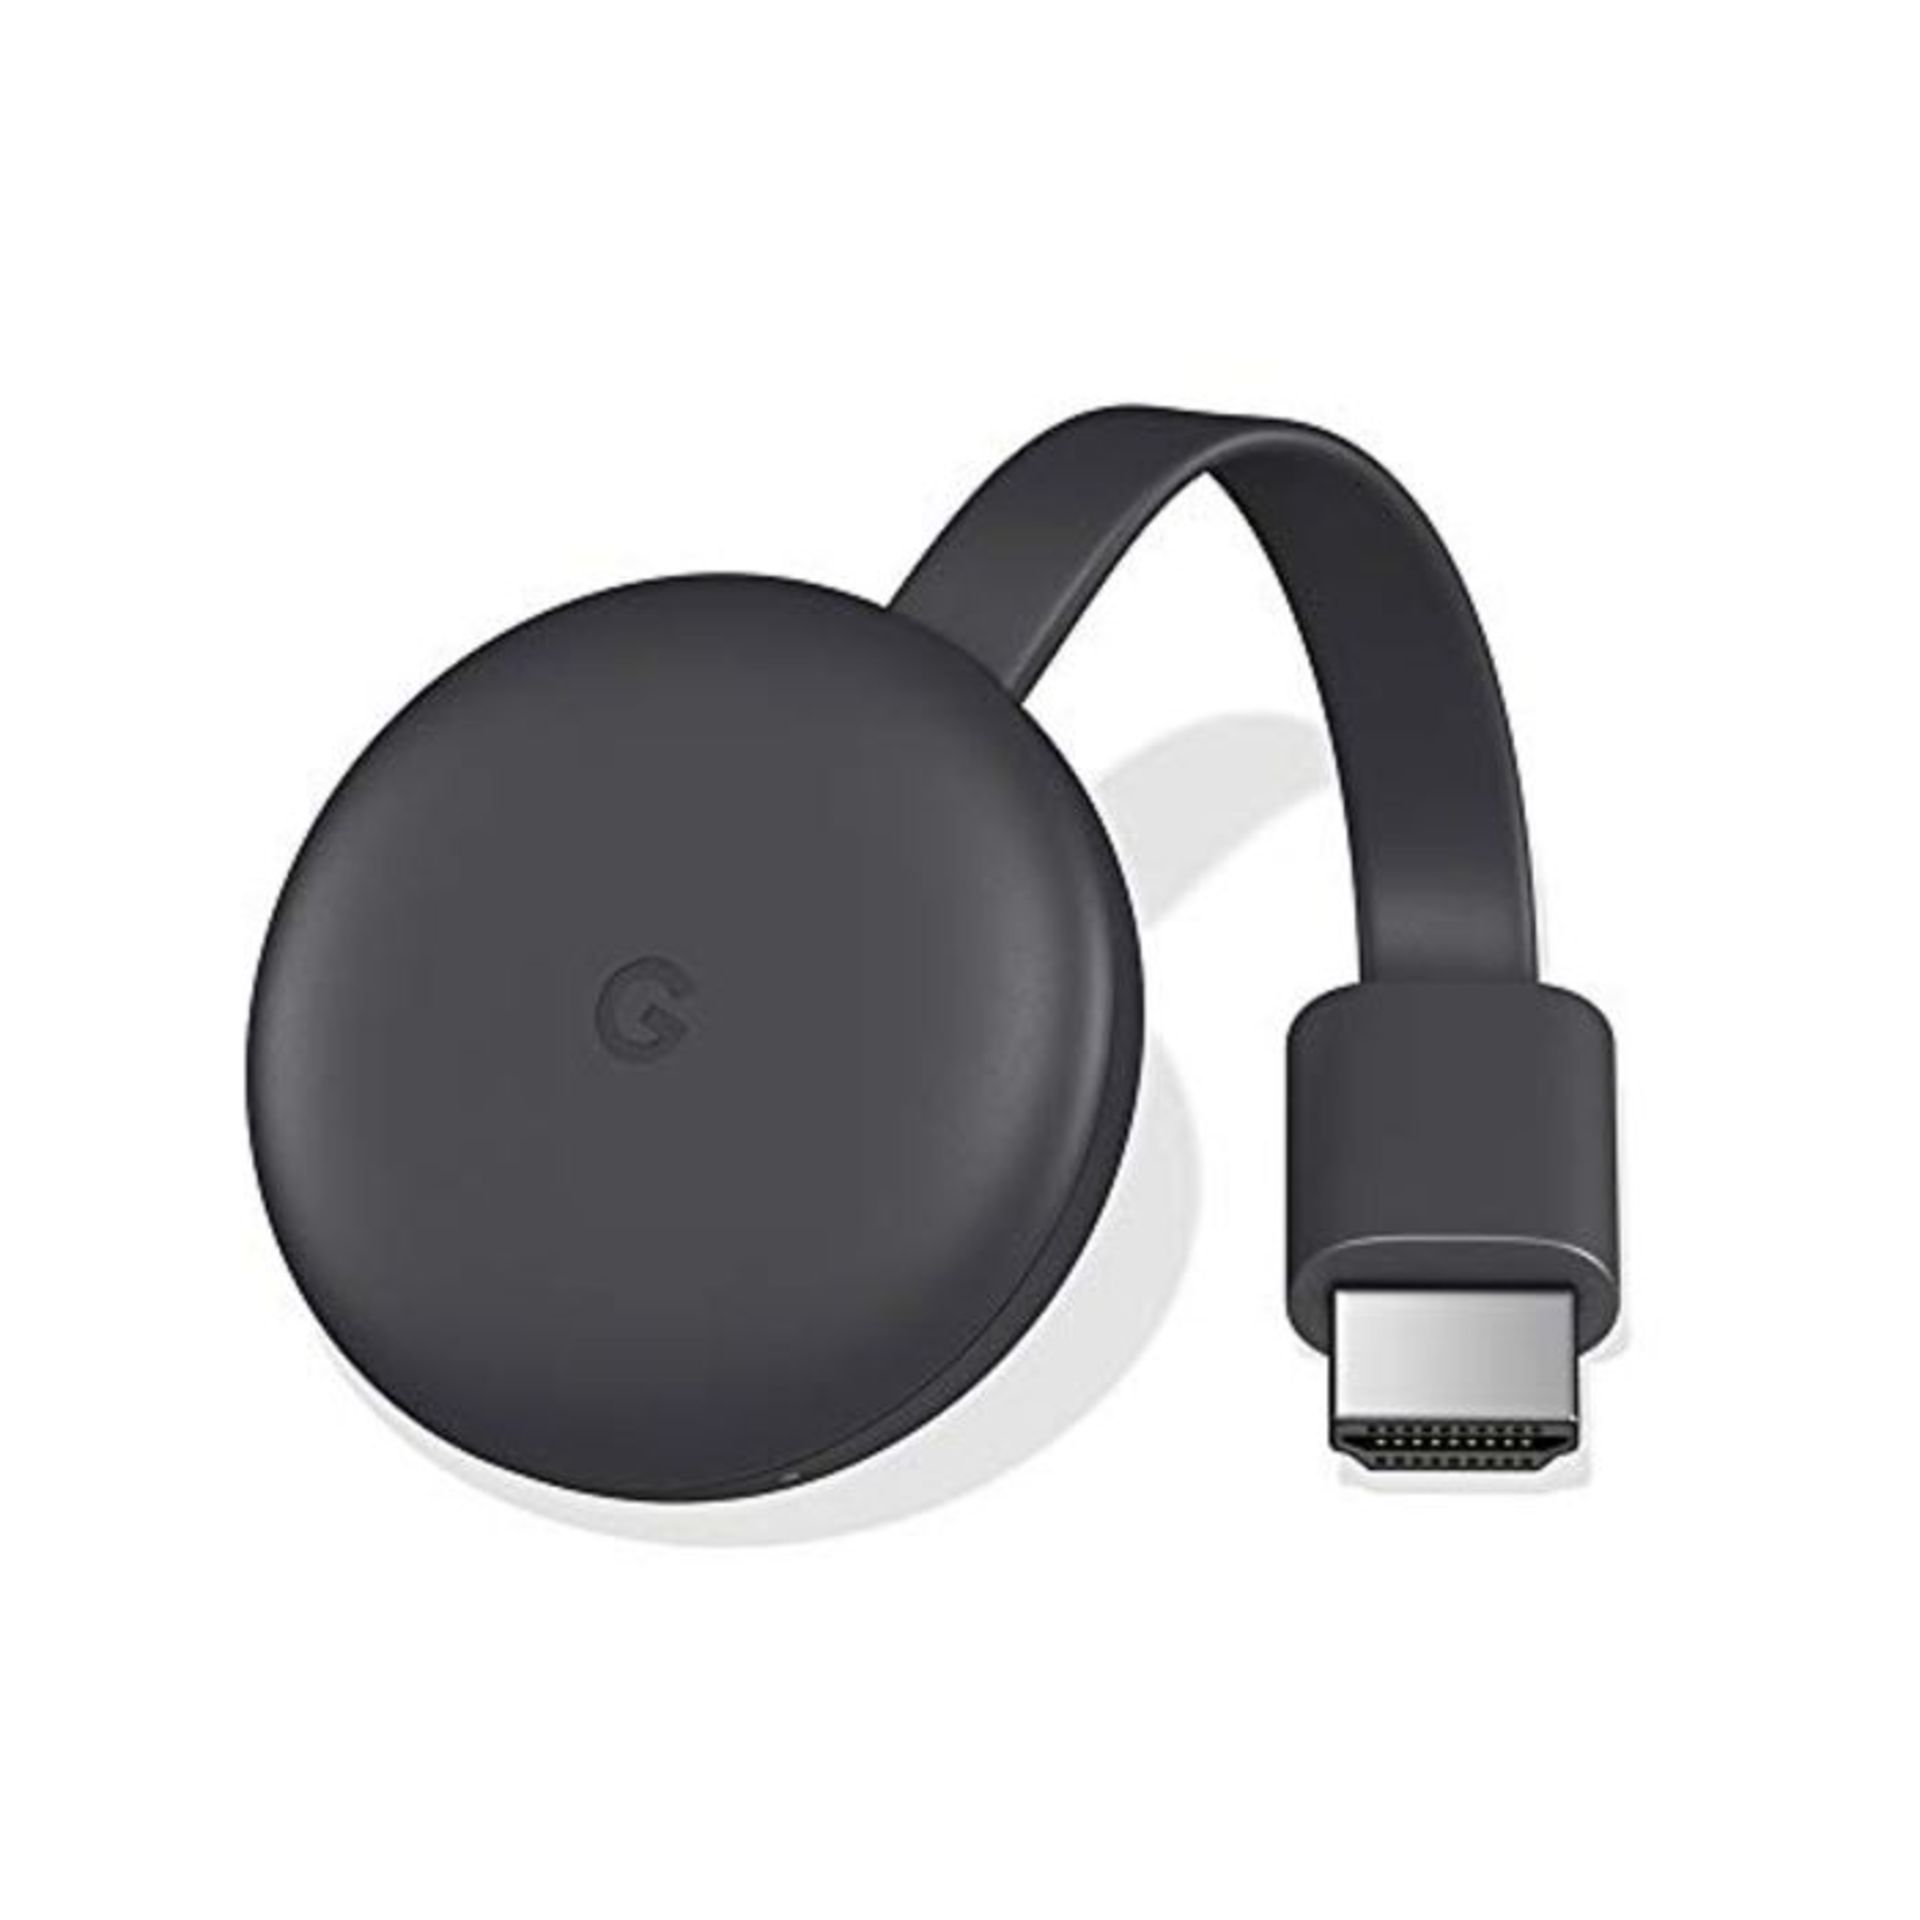 Google Chromecast - Cast to your TV in HD, Android Streaming Stick - Stream YouTube, N